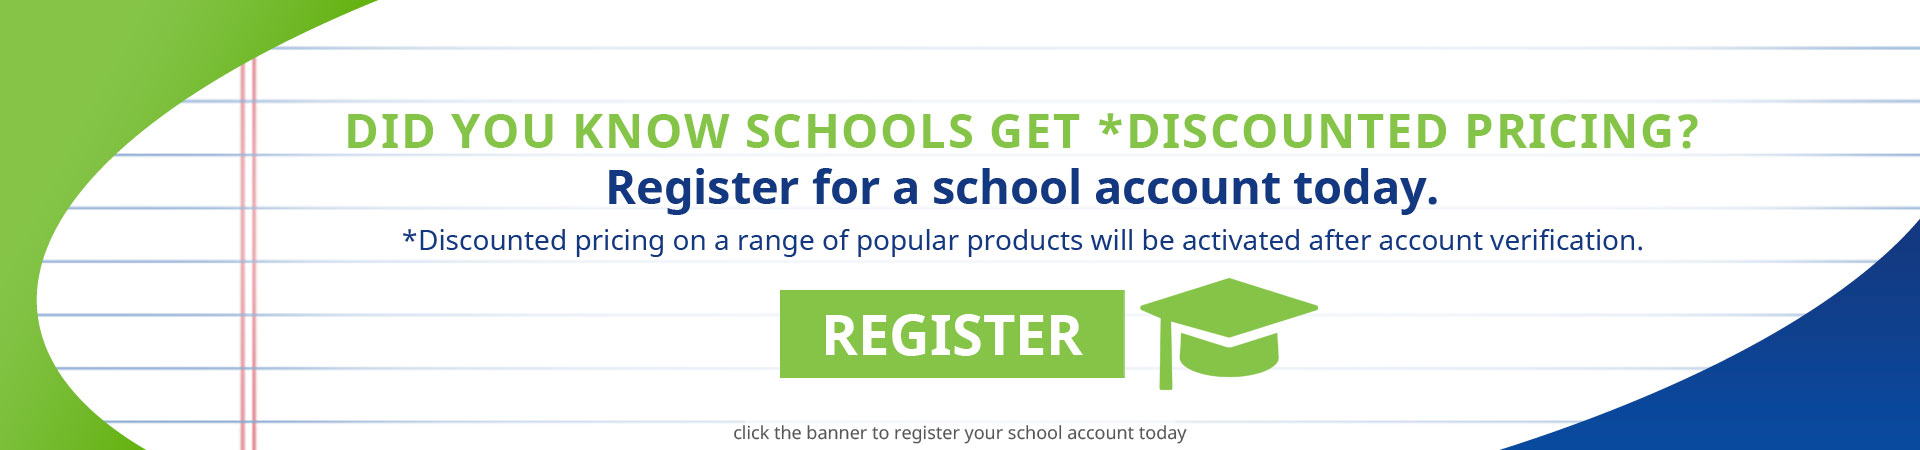 Register for a school account to get access to discounted pricing!